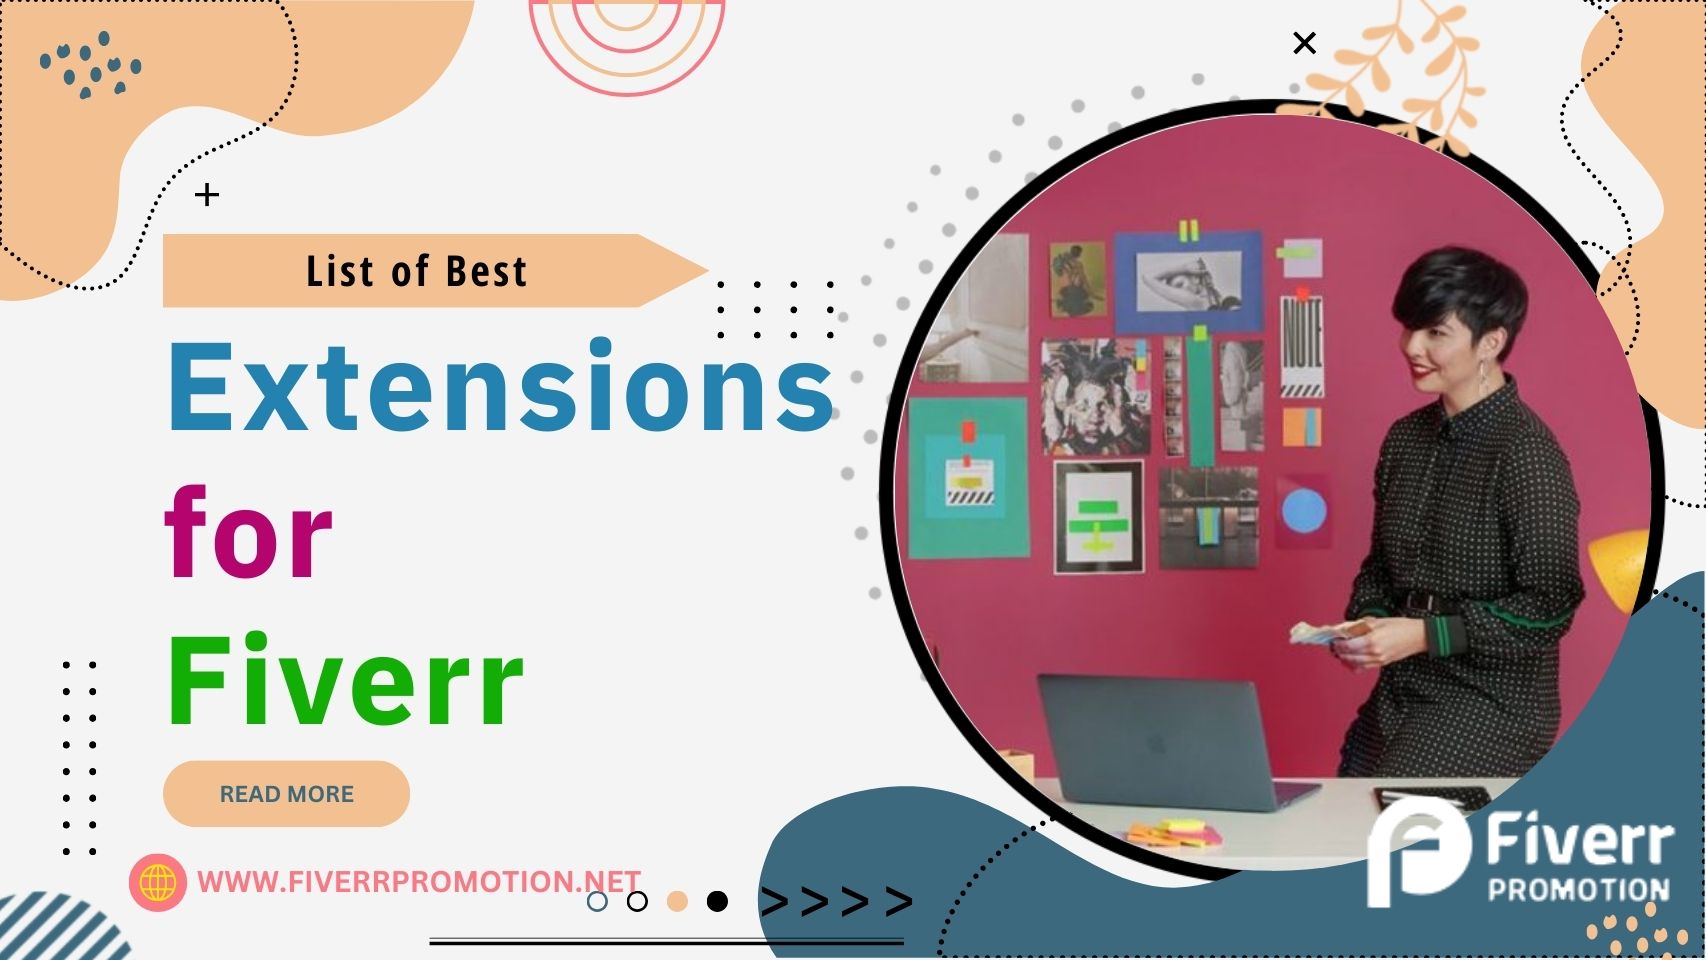 List of Best Extensions for Fiverr